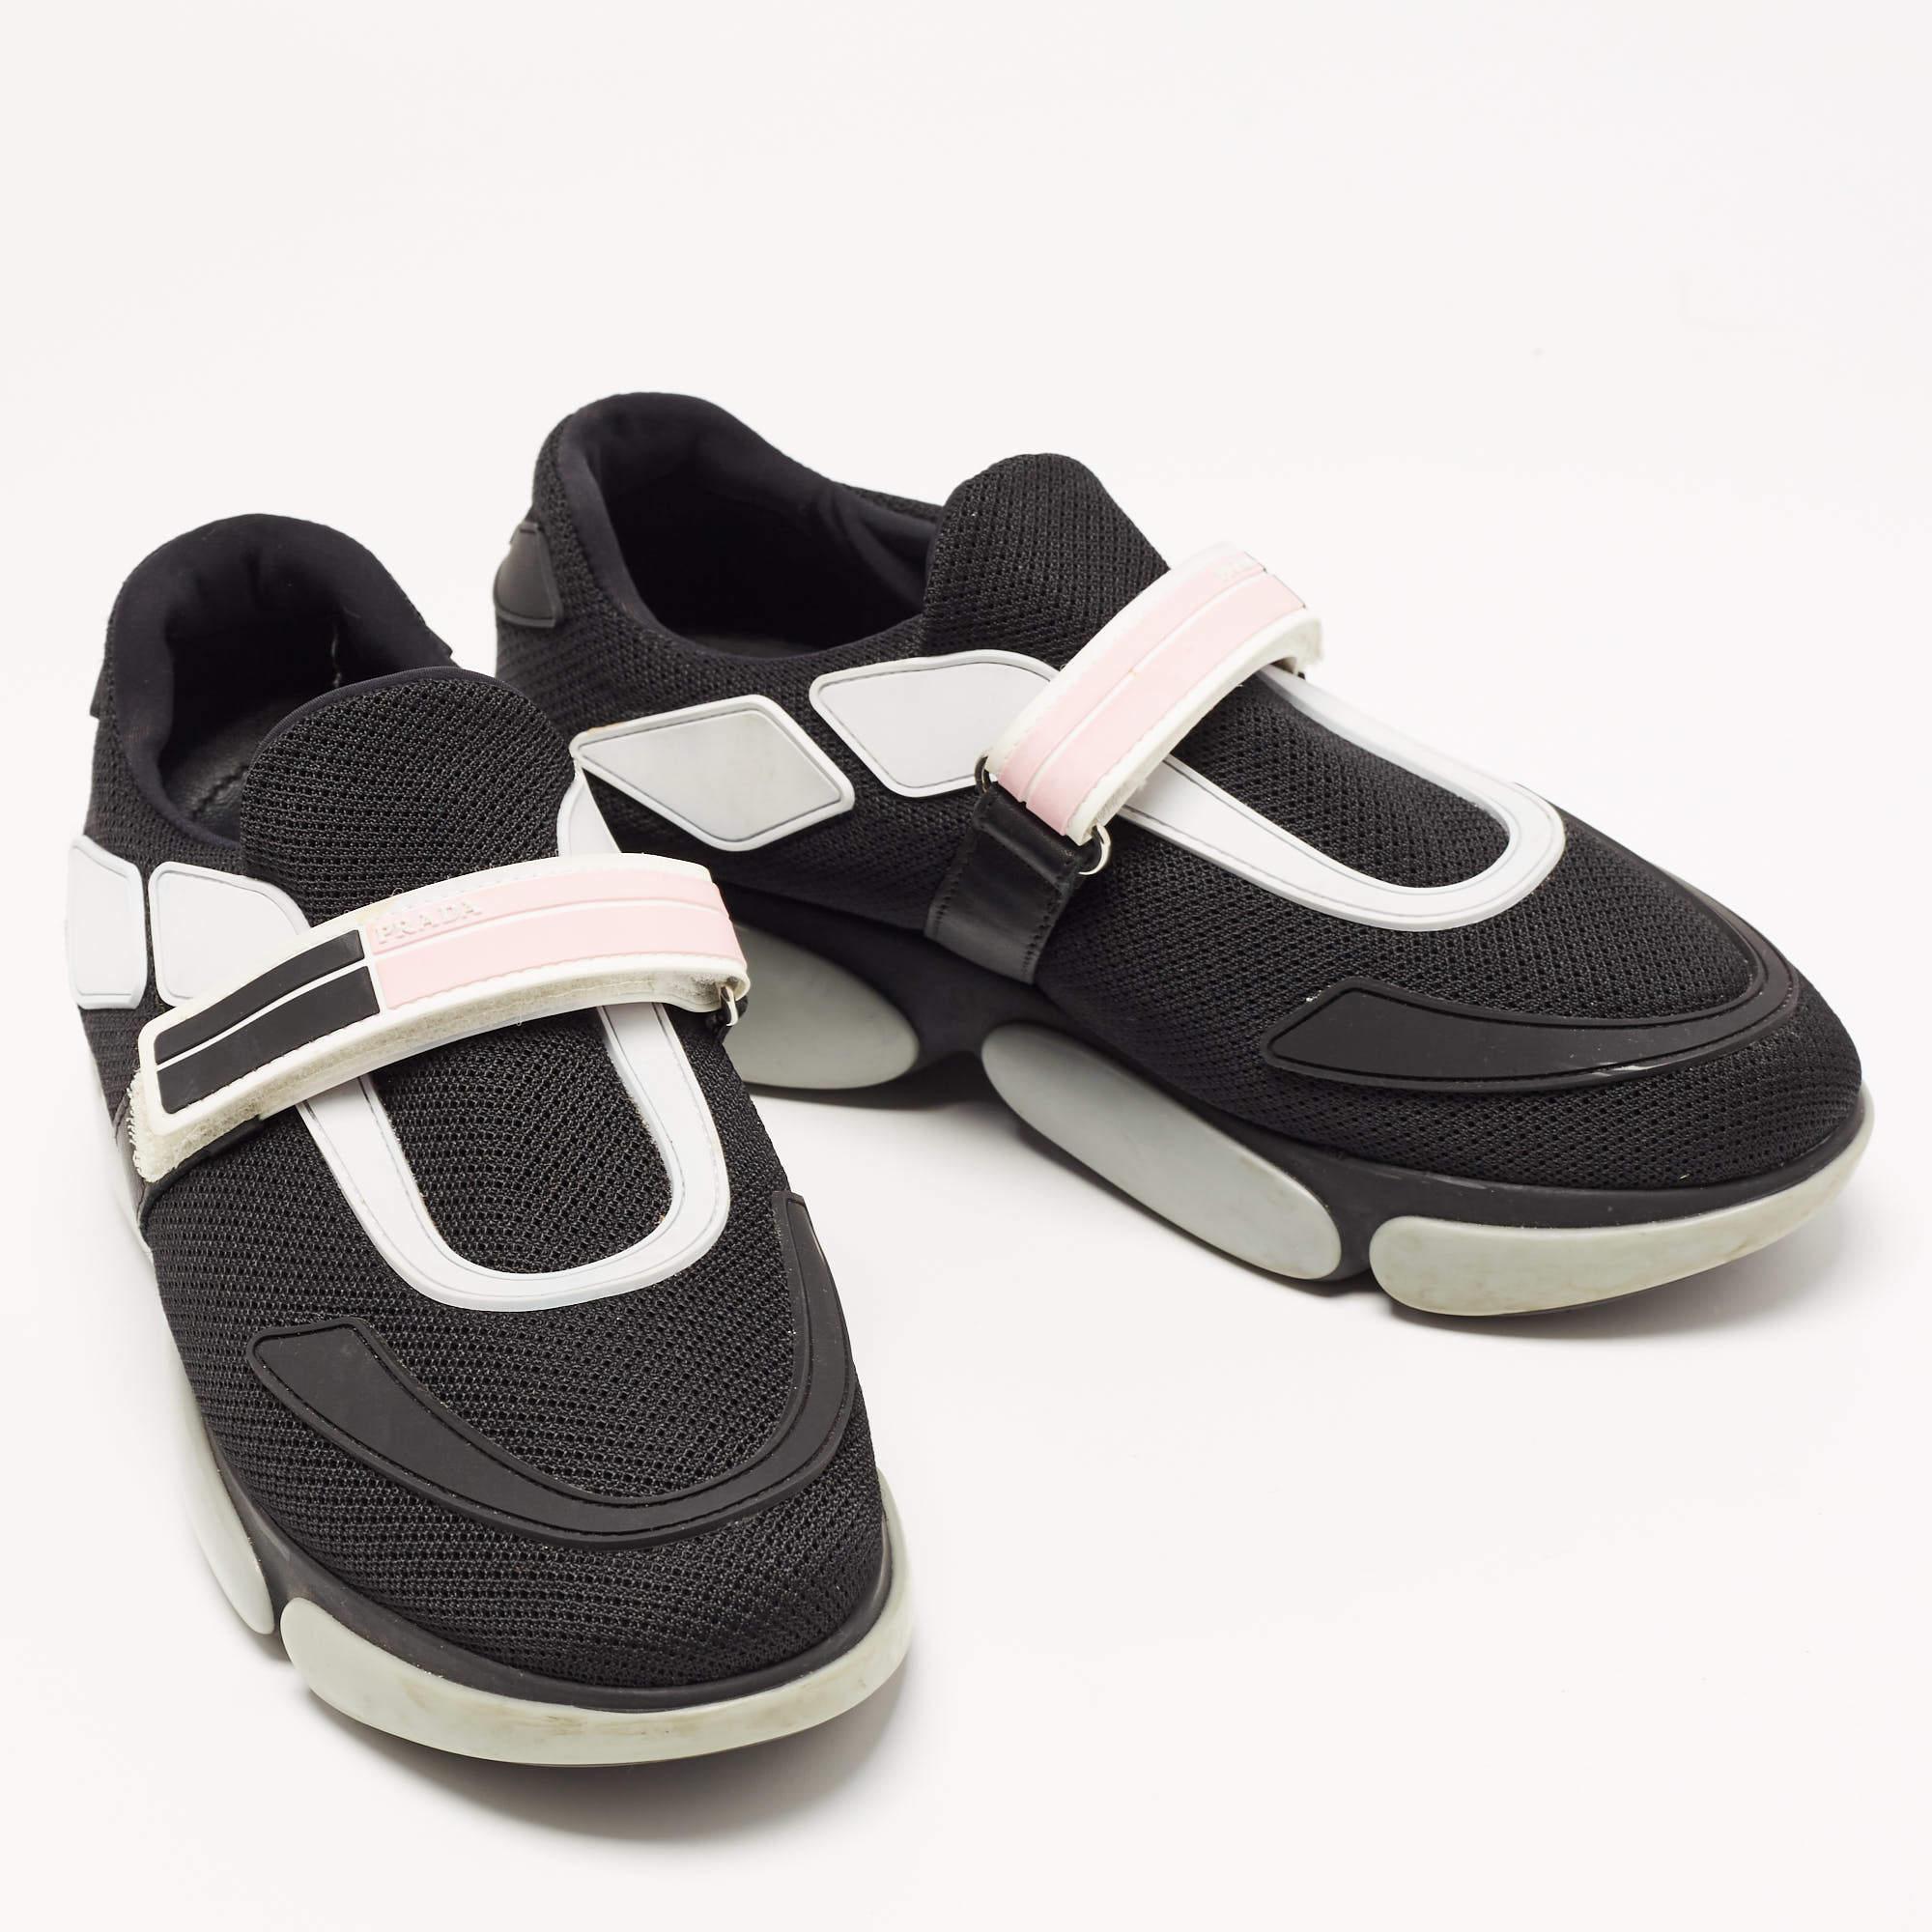 Elevate your footwear game with these Prada black sneakers. Combining high-end aesthetics and unmatched comfort, these sneakers are a symbol of modern luxury and impeccable taste.

